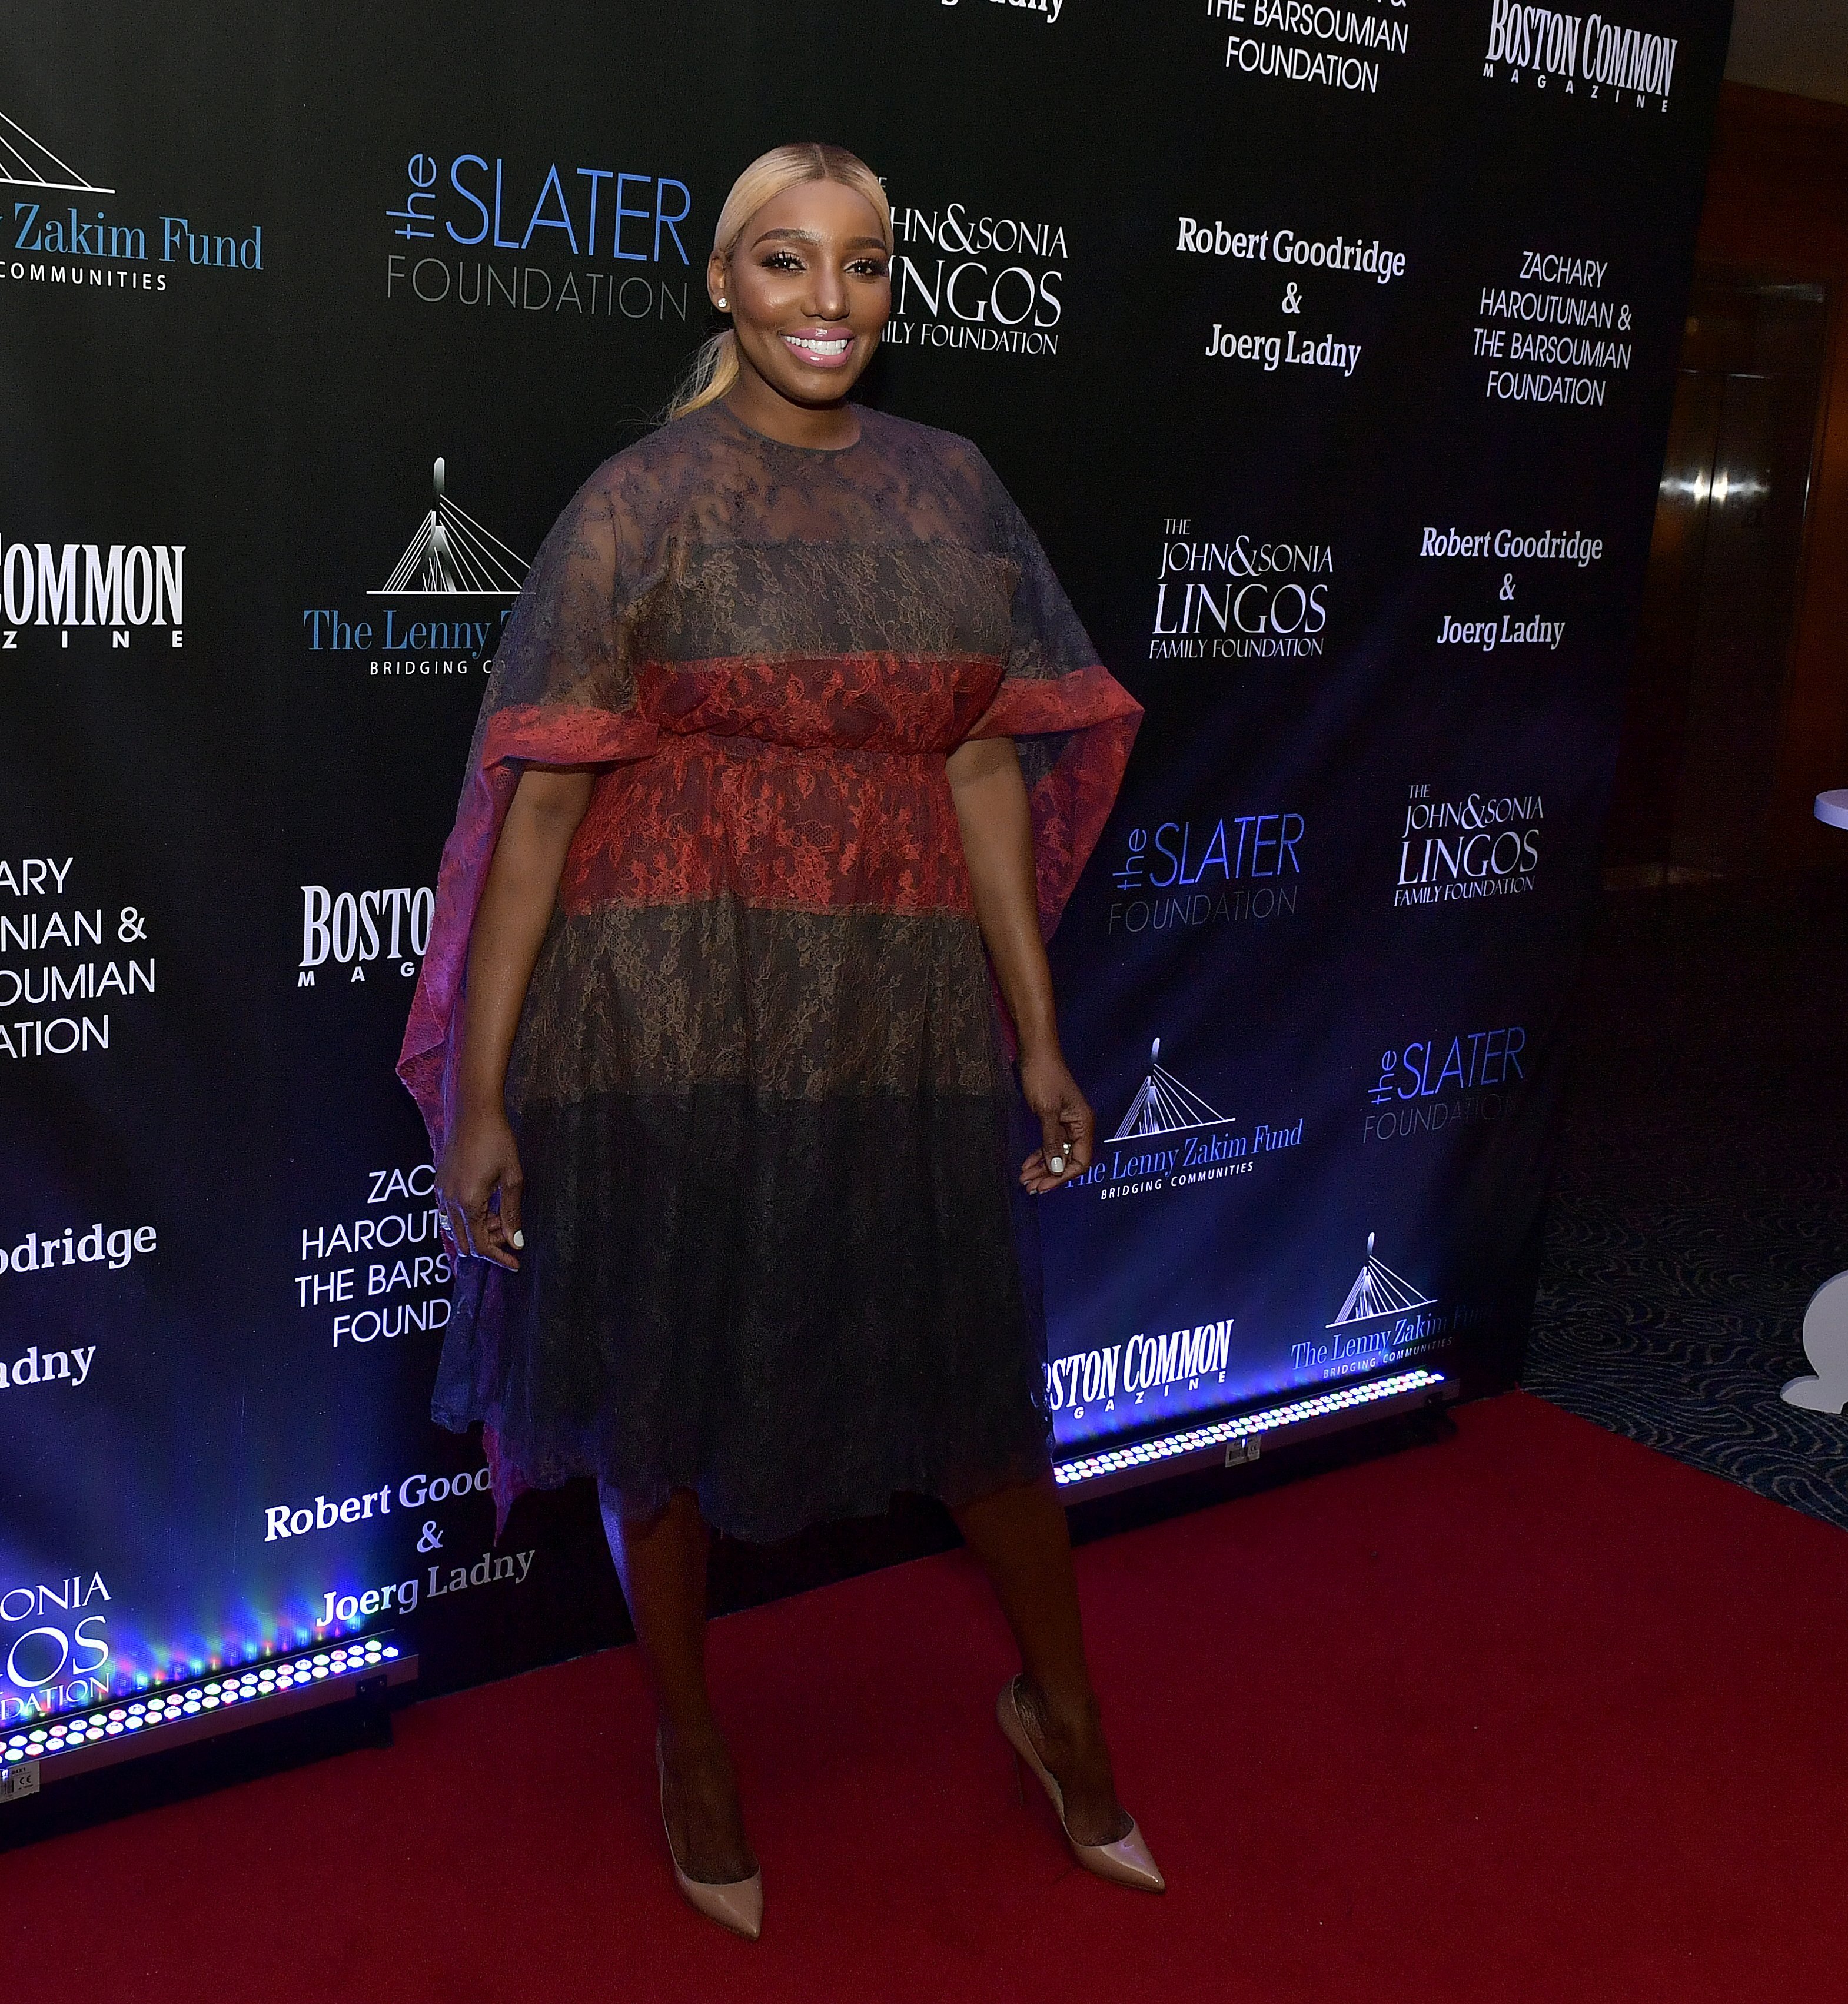 NeNe Leakes at the Lenny Zakim Fund's 9th Annual Casino Night on March 3, 2018 in Boston, MA | Photo: Getty Images